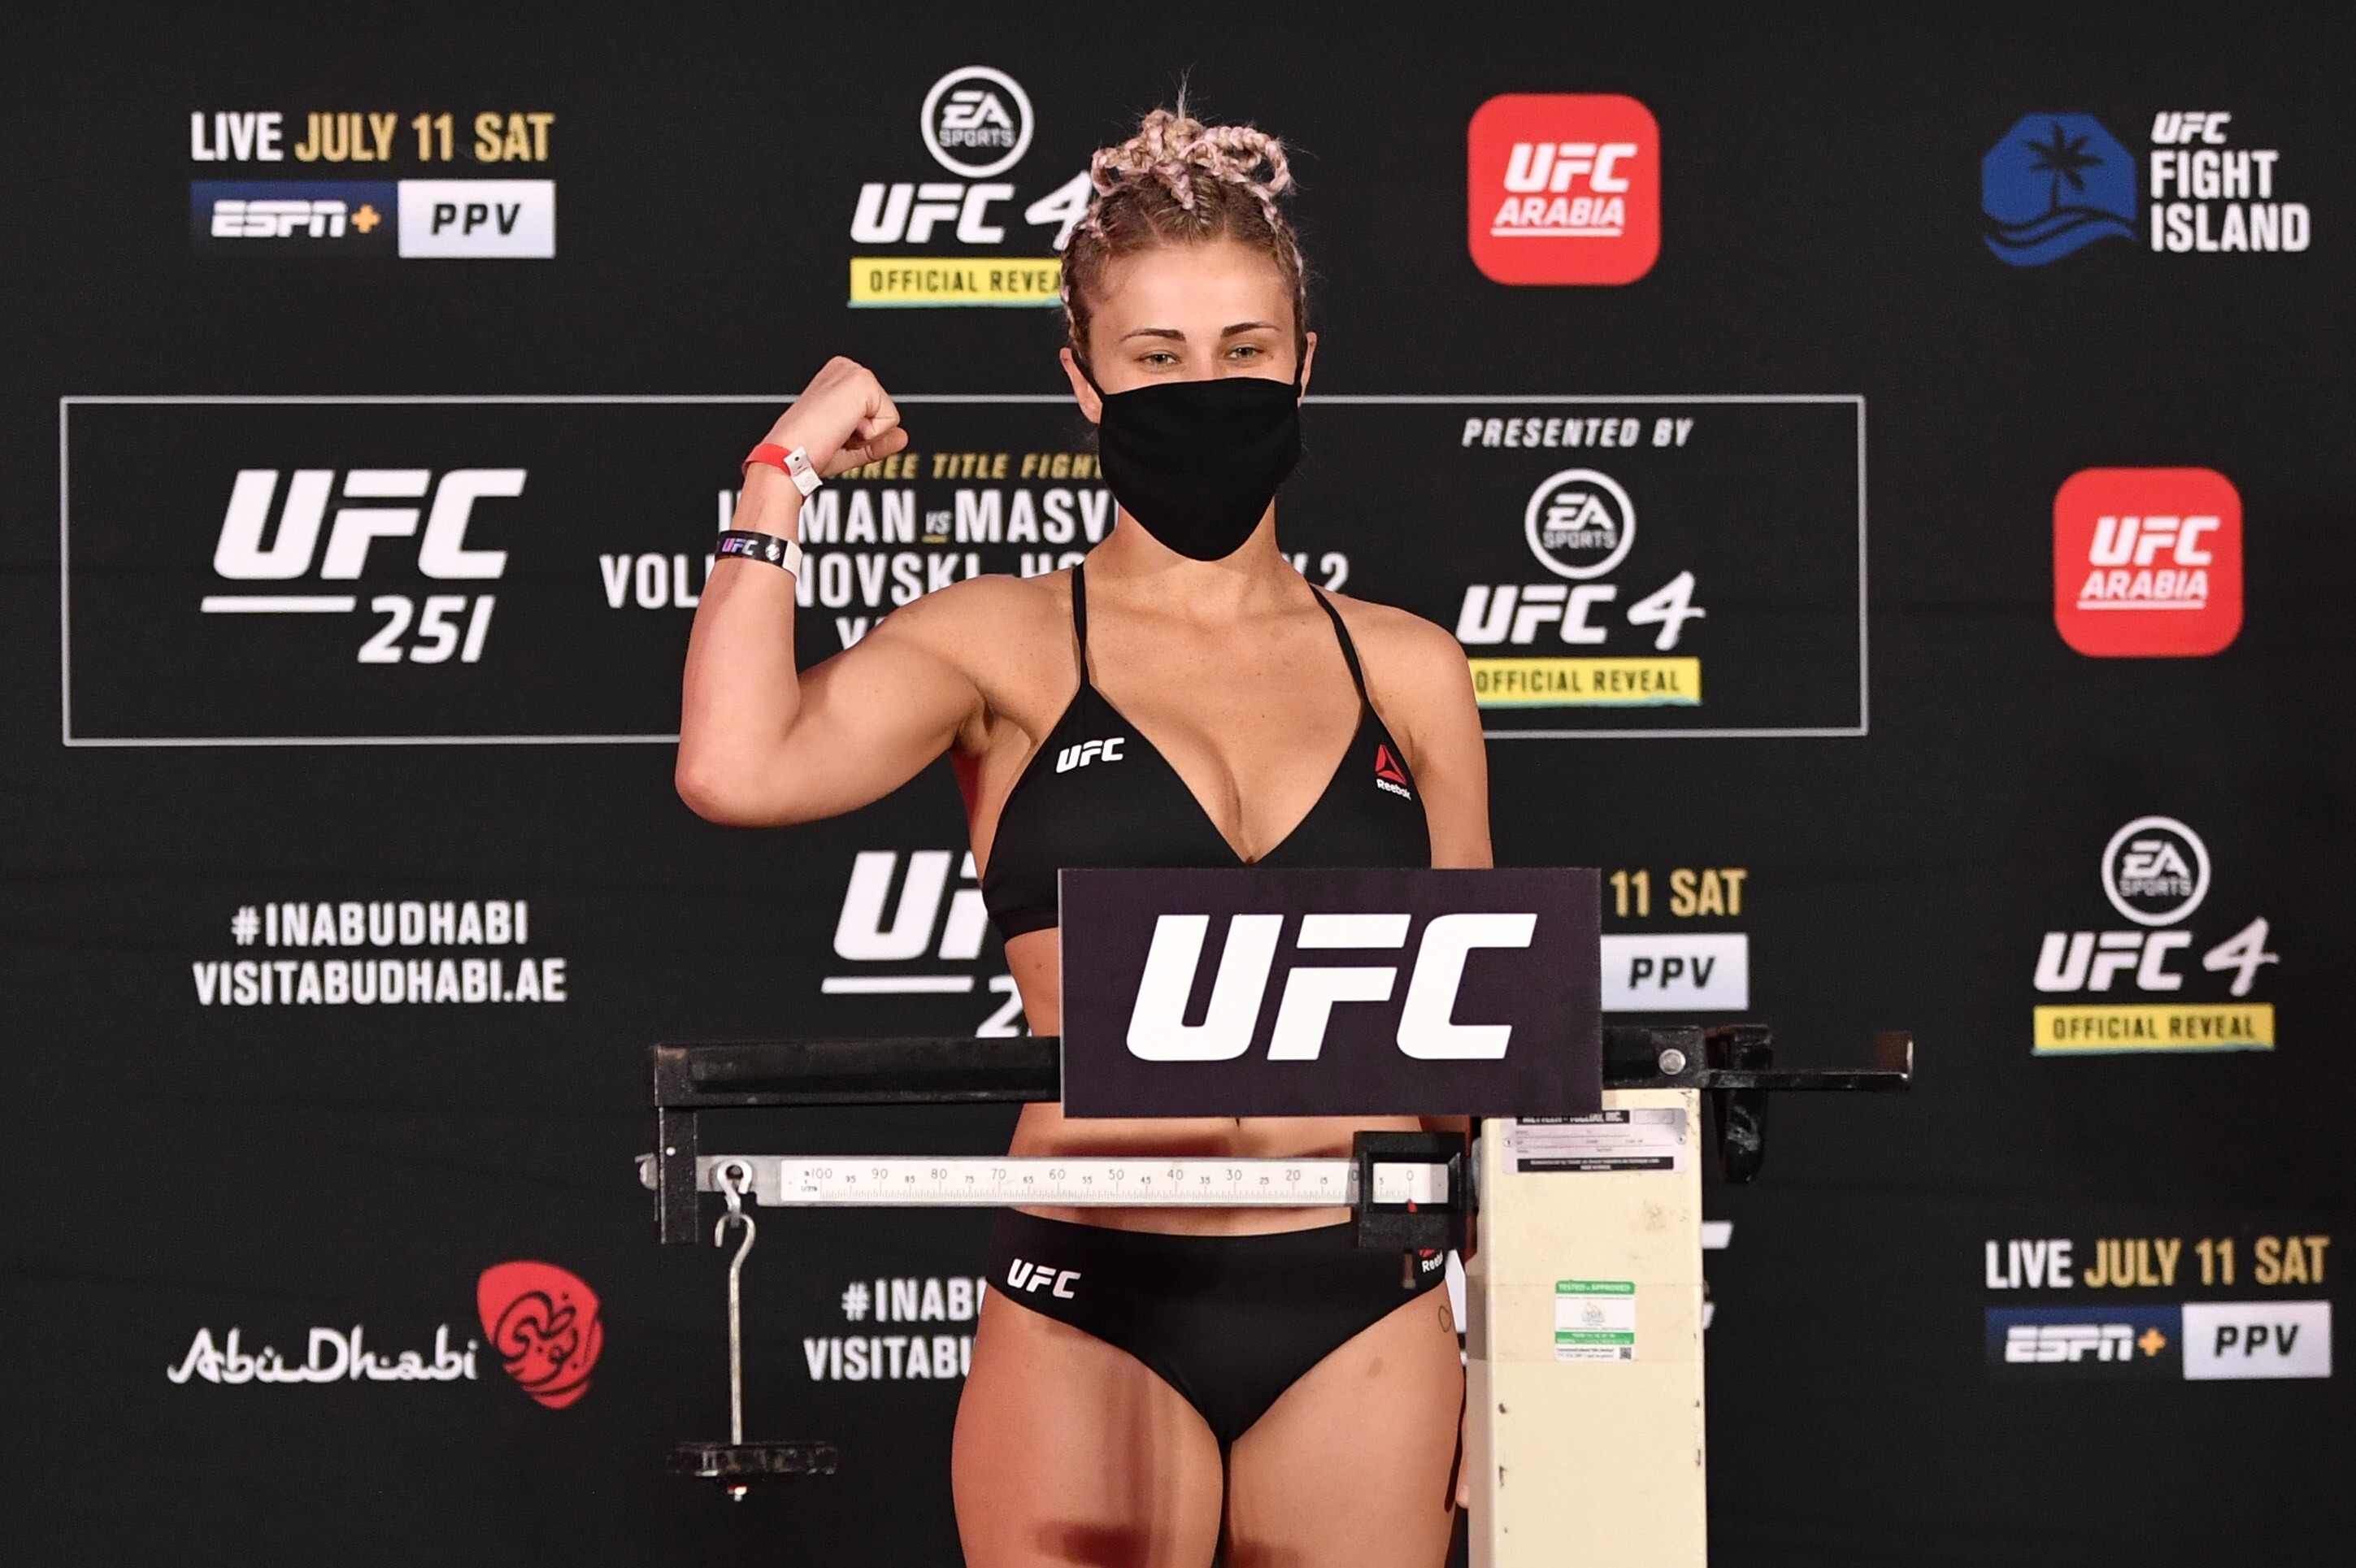 Paige VanZant poses on the scale during the UFC 251 official weigh-in. Photo: Jeff Bottari/Zuffa LLC